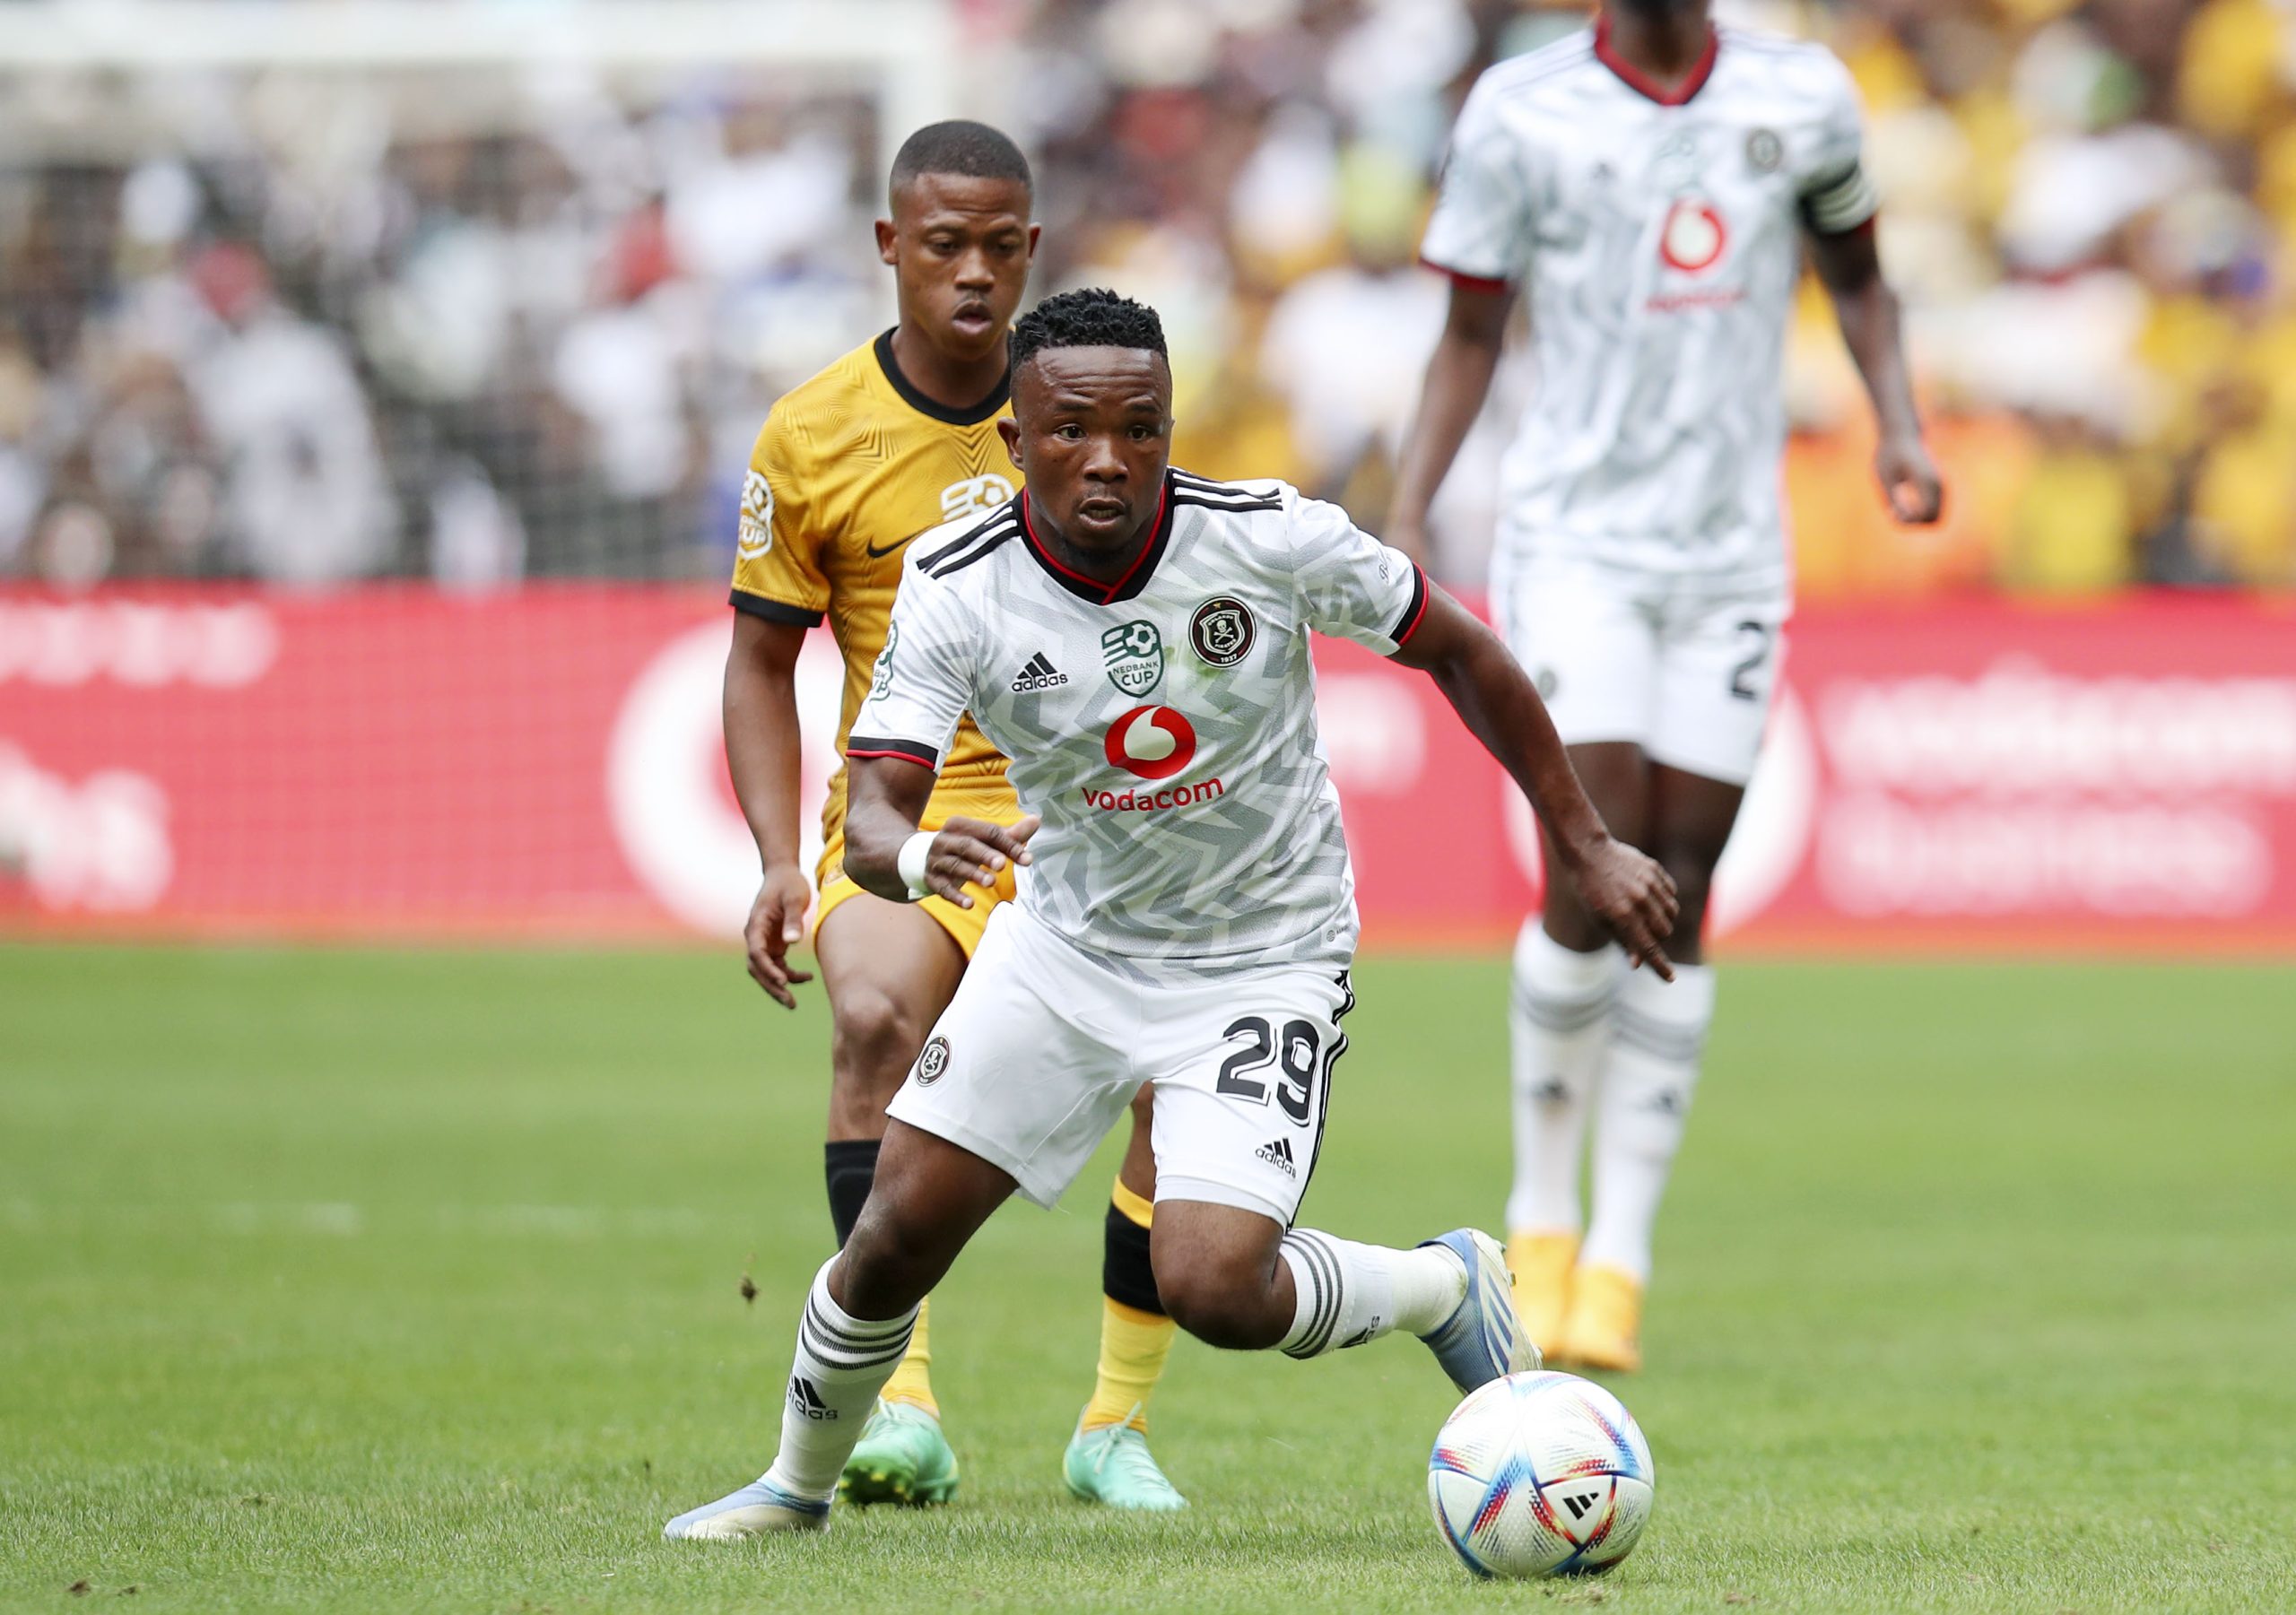 Orlando Pirates are through to the Nedbank Cup final after beating archrivals Kaizer Chiefs